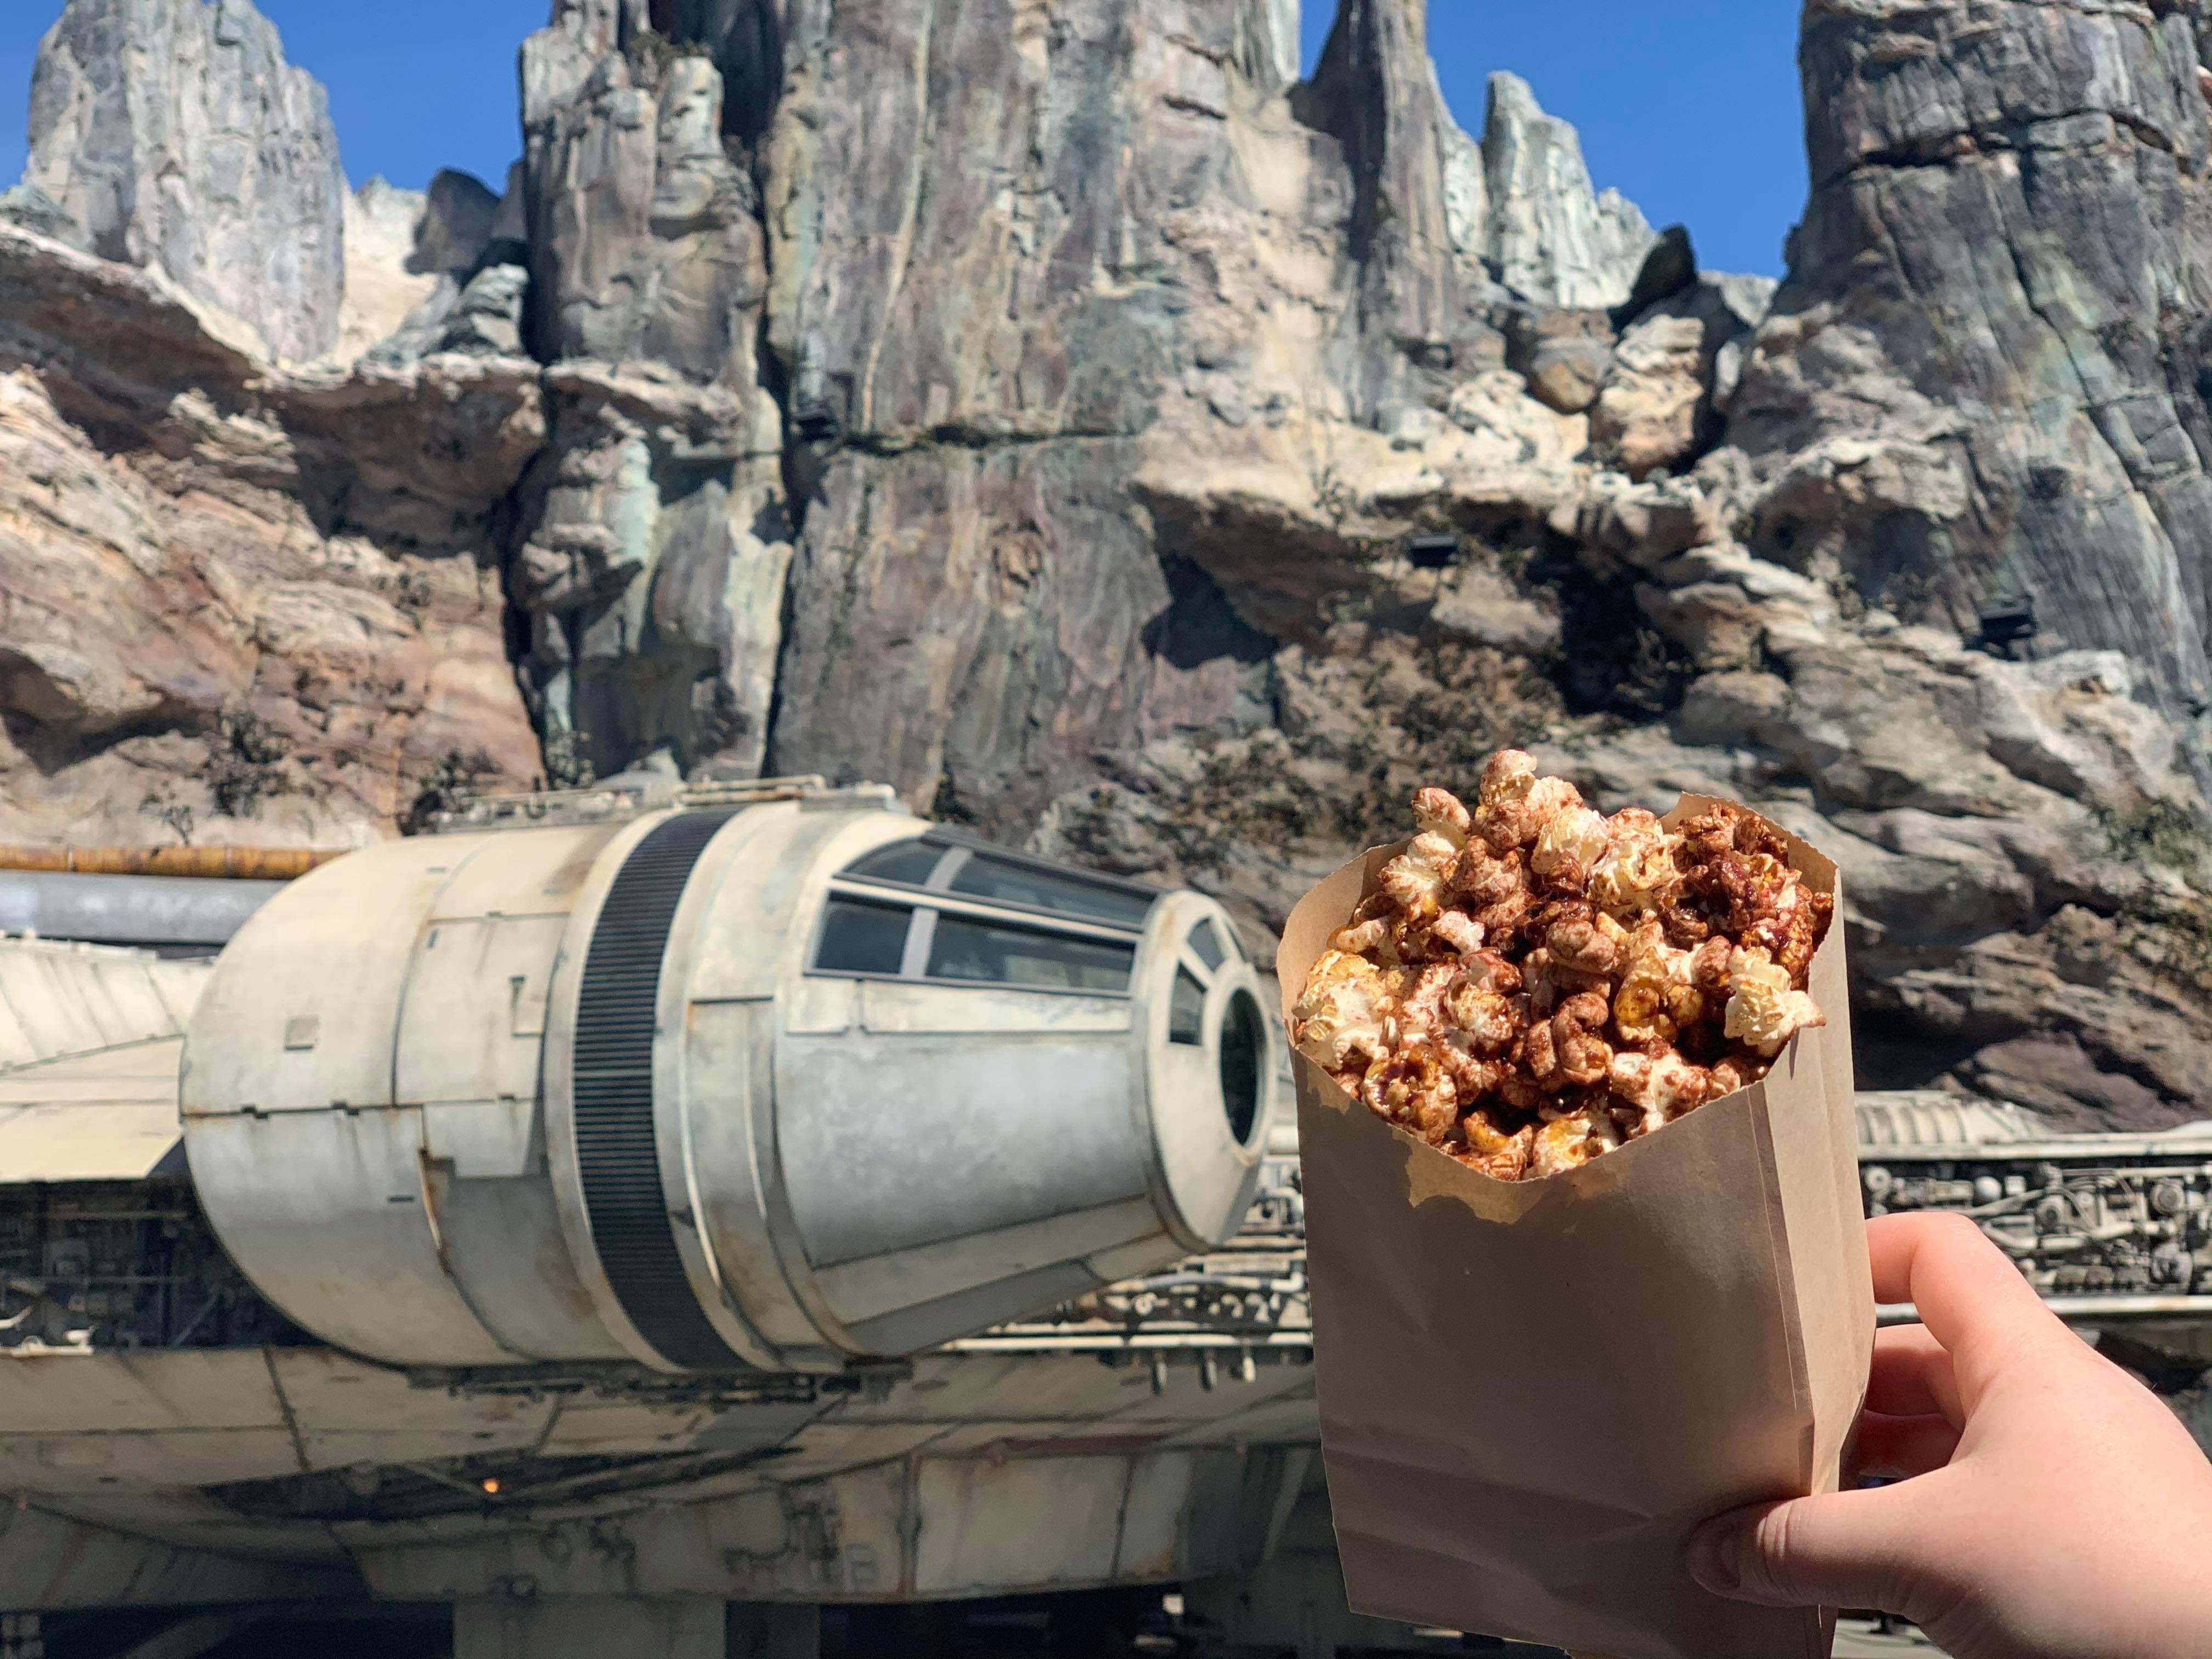 New Chocolate Popcorn Available At Galaxy’s Edge